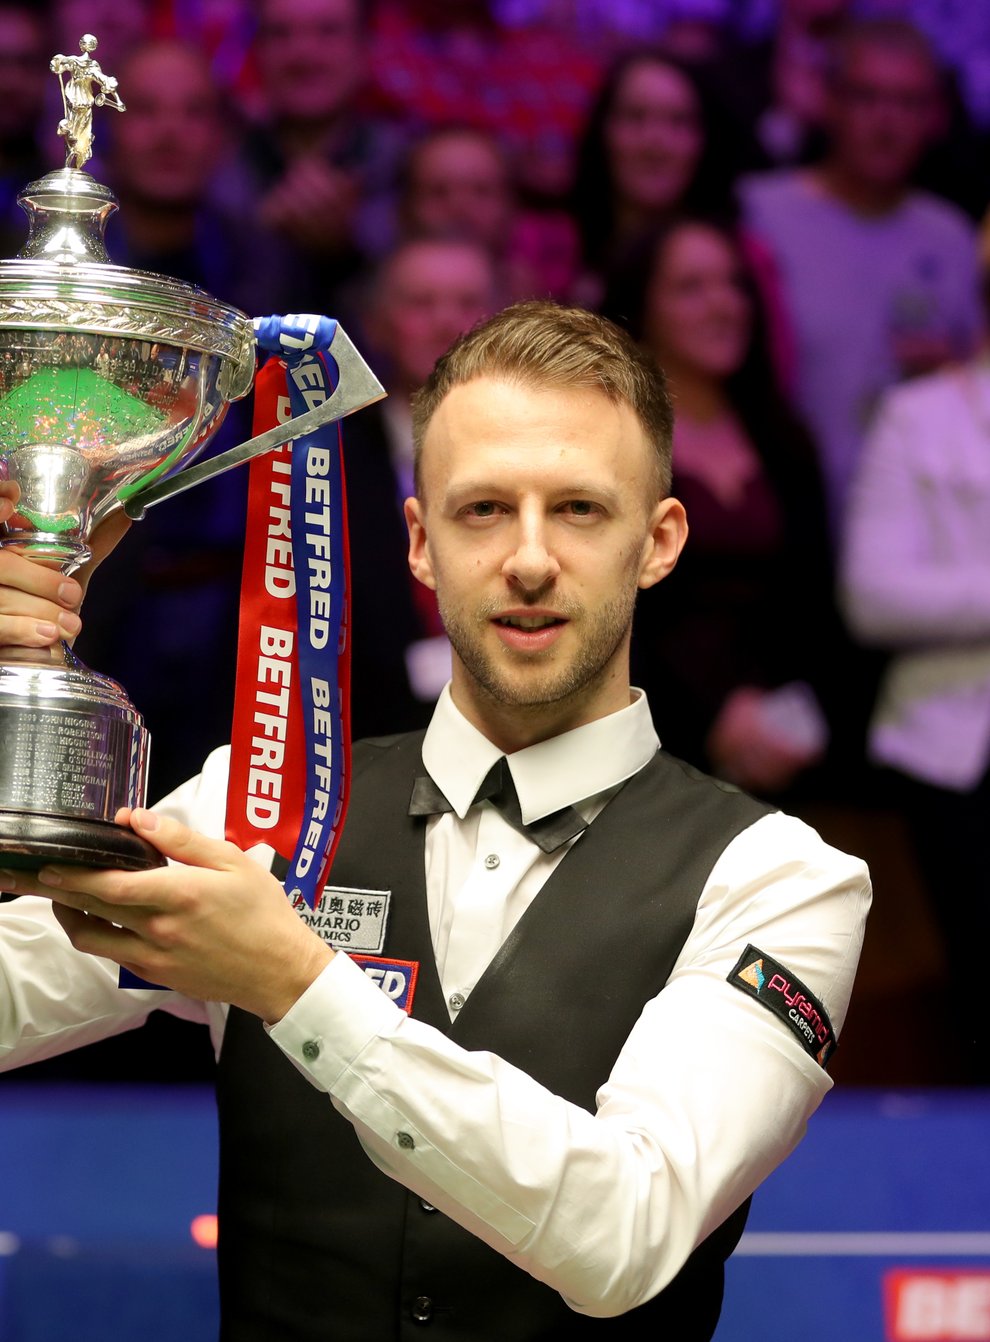 Reigning world champion Judd Trump will be in action as snooker resumes on Monday with the Championship League in Milton Keynes